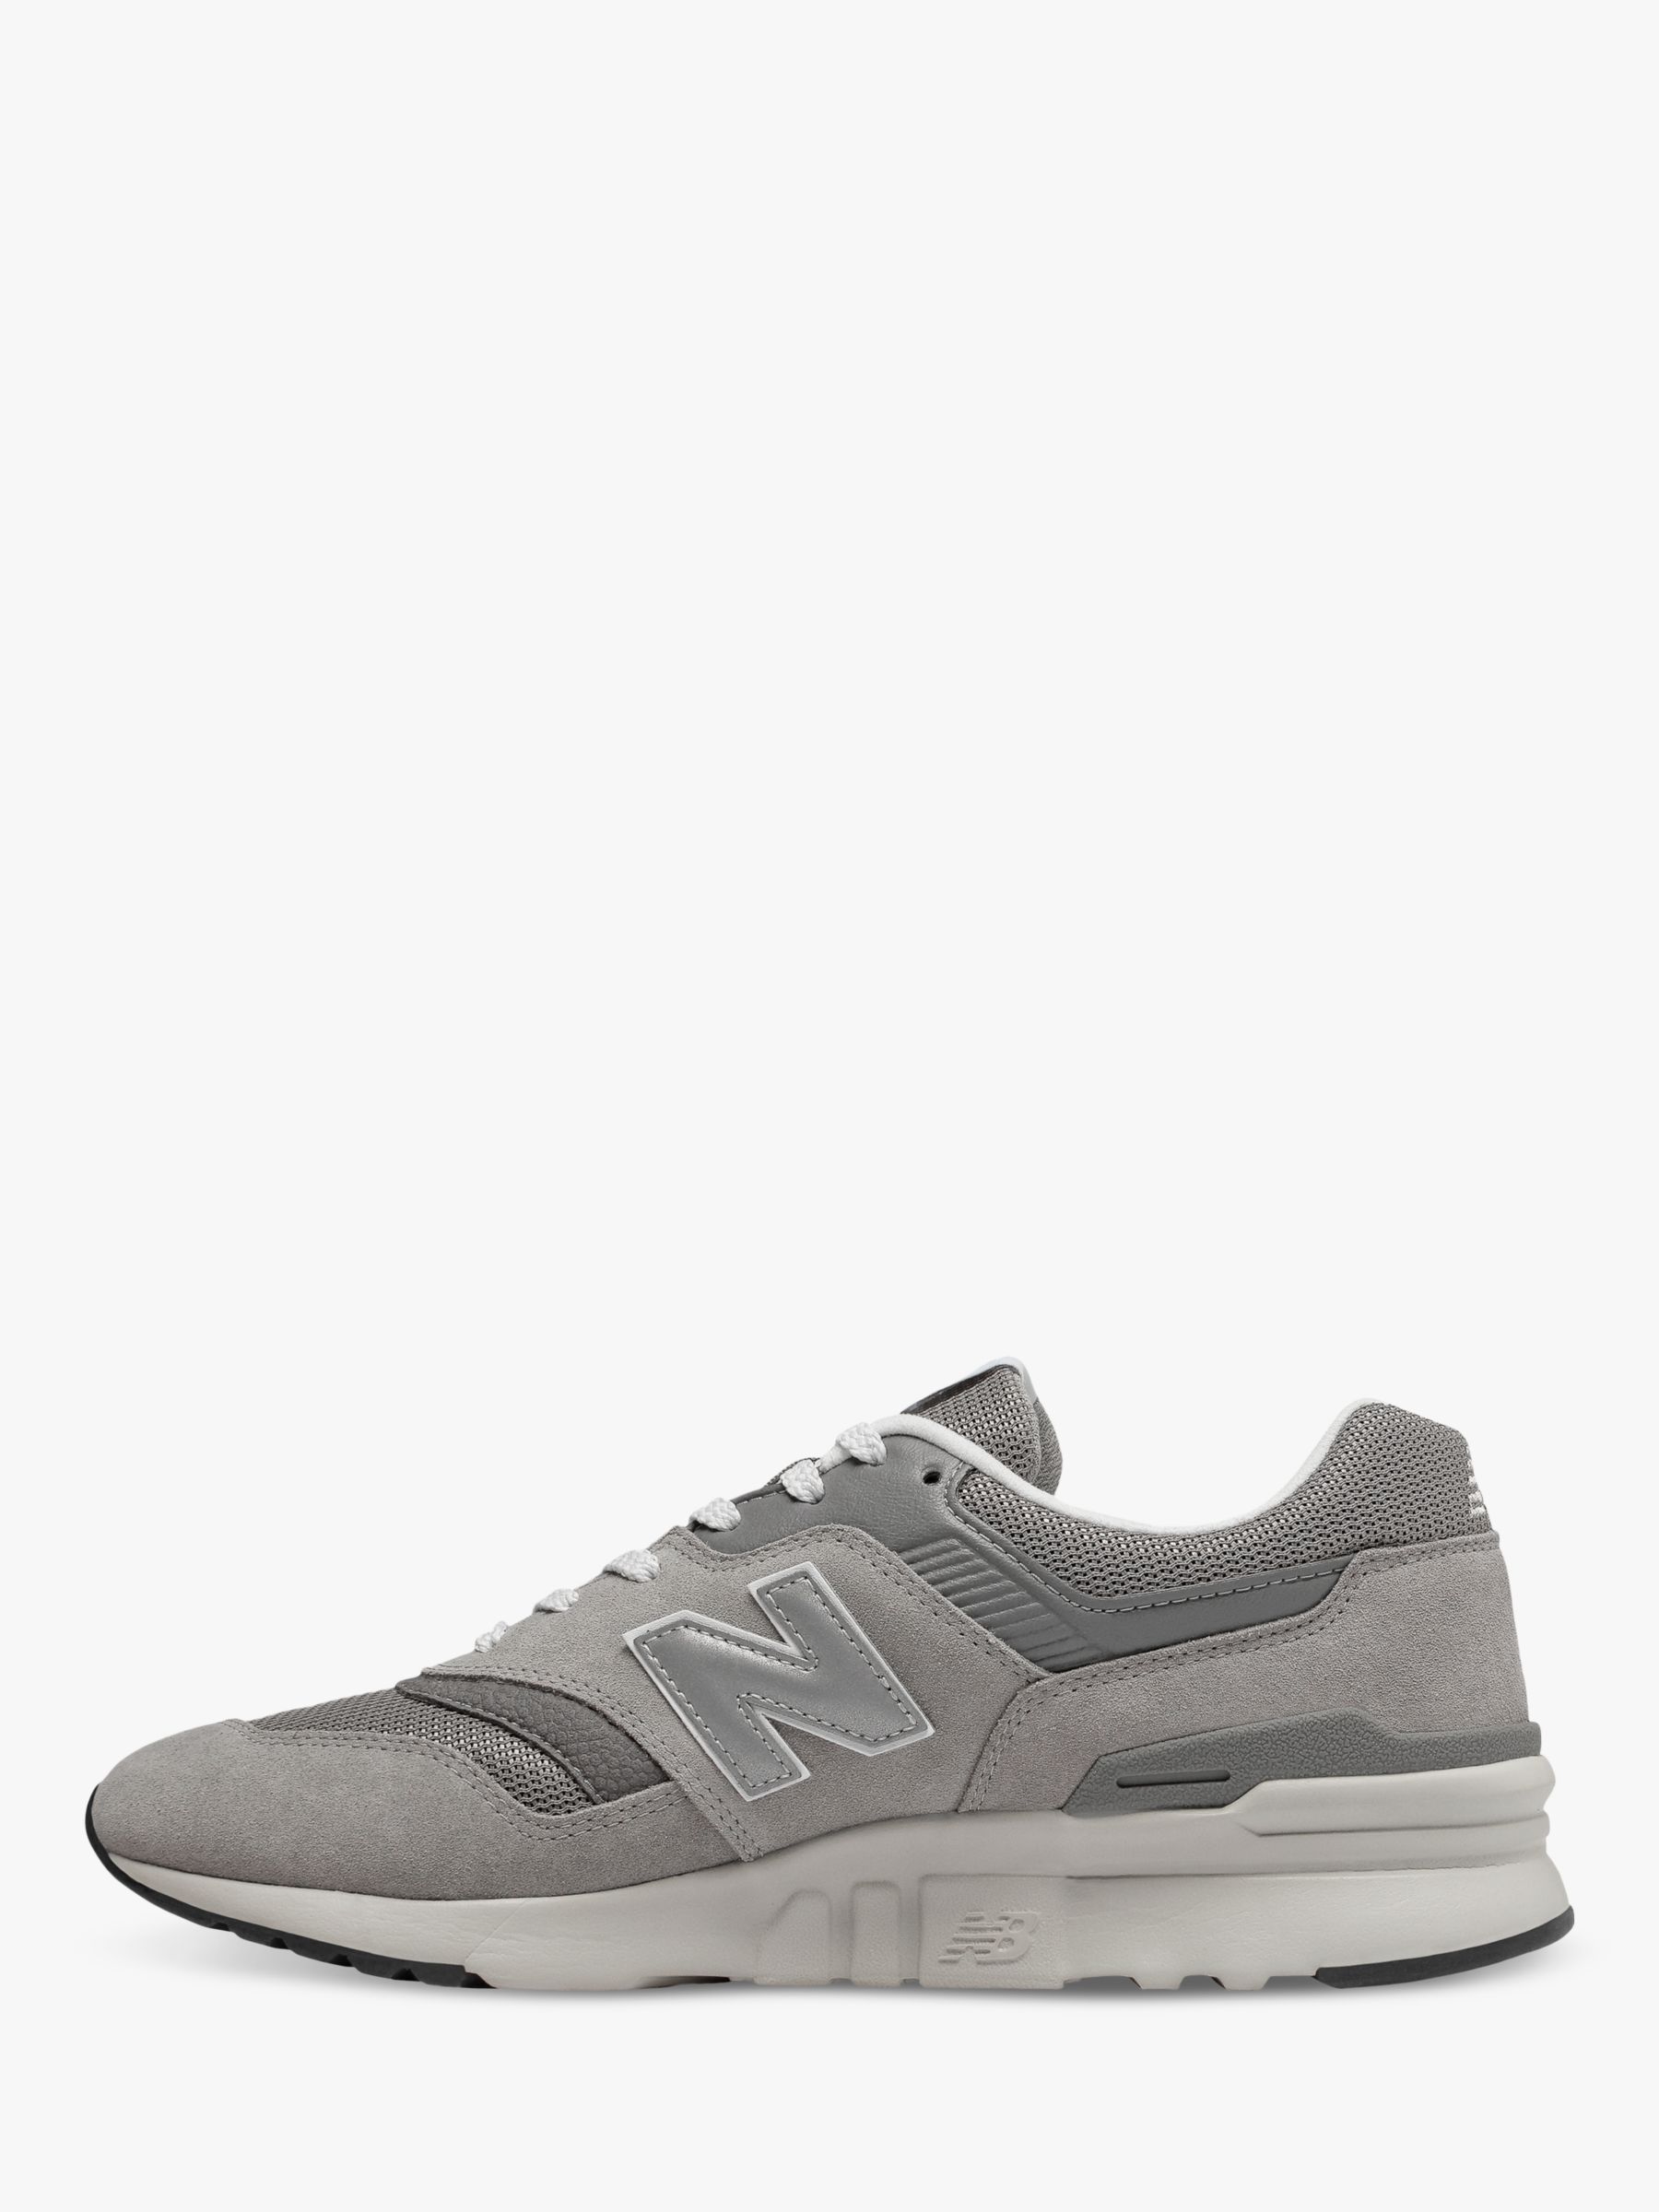 Buy New Balance 997H Men's Suede Trainers Online at johnlewis.com